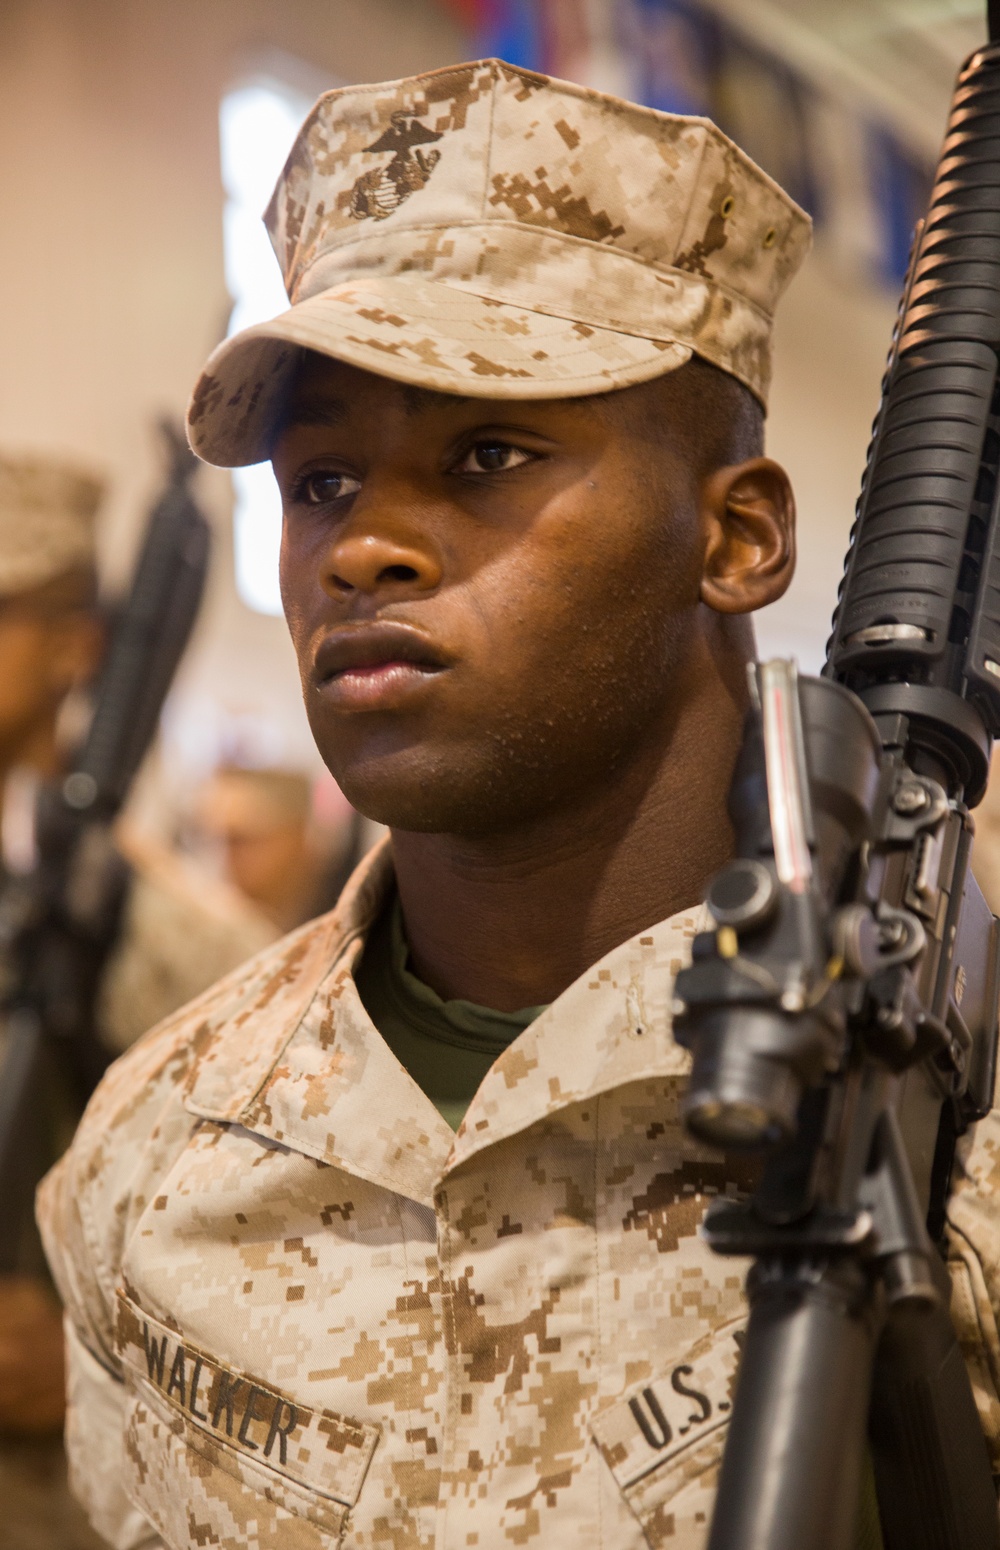 Parris Island recruits march closer to title Marine